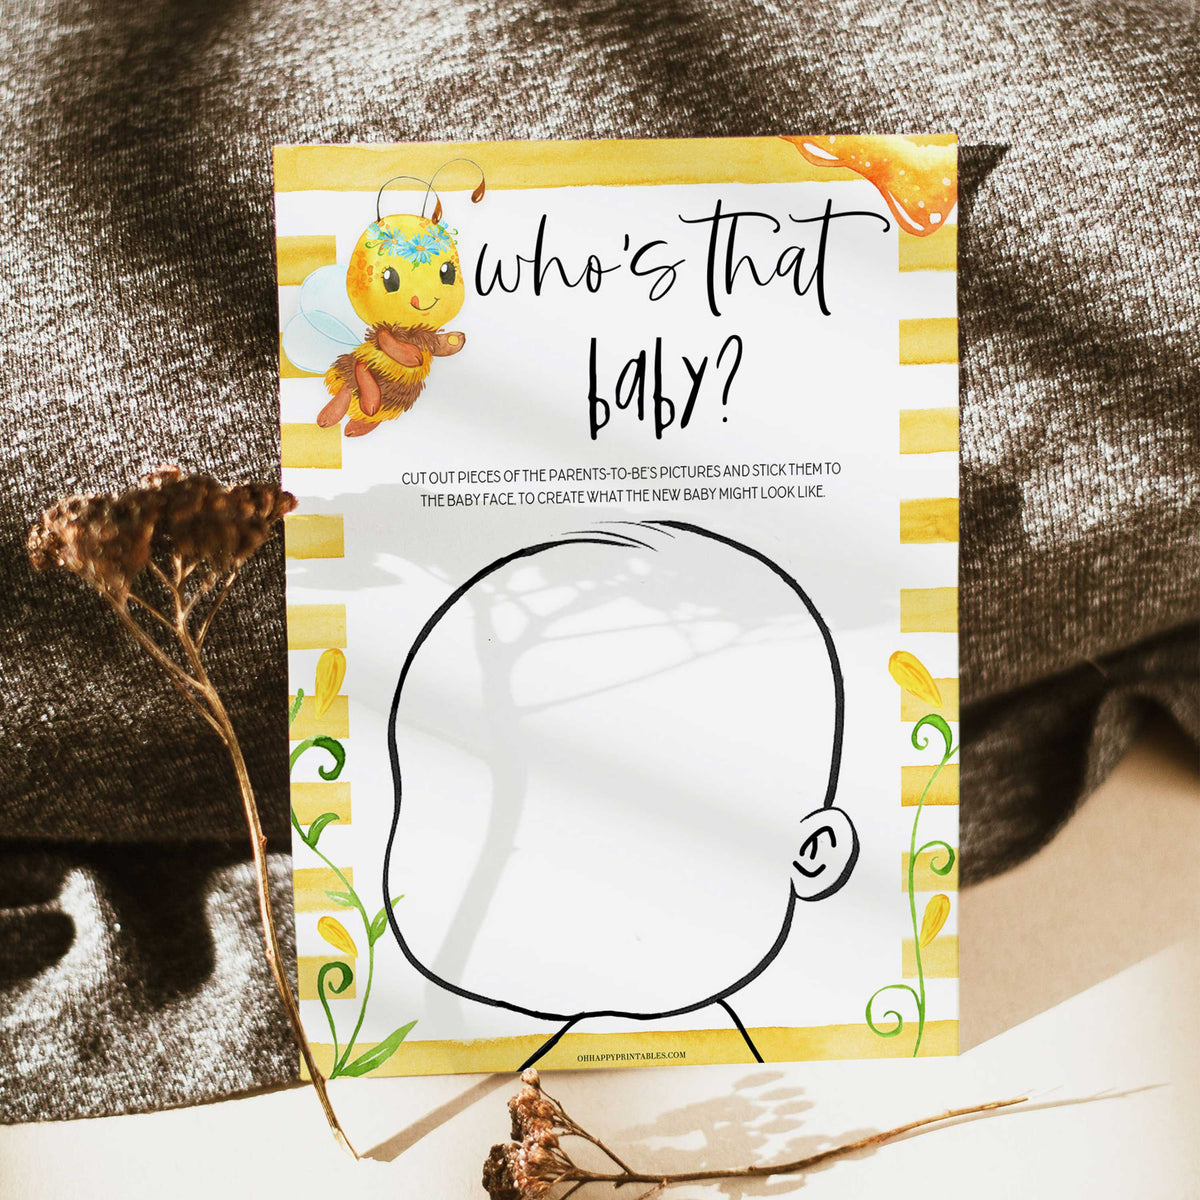 who gave me my looks, Printable baby shower games, mommy bee fun baby games, baby shower games, fun baby shower ideas, top baby shower ideas, mommy to bee baby shower, friends baby shower ideas